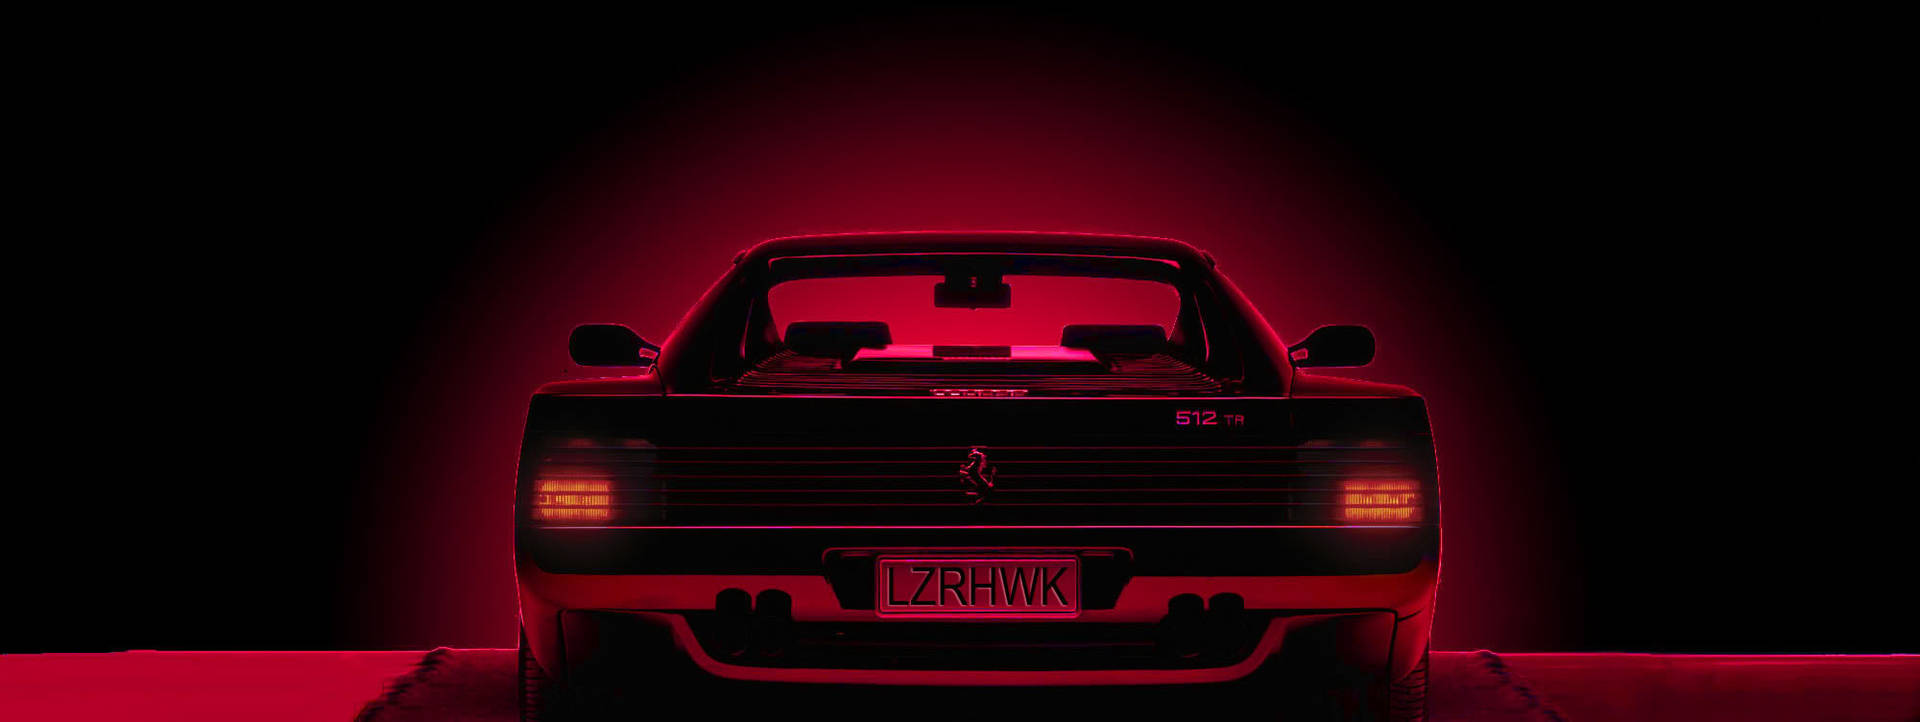 2000X752 Retrowave Wallpaper and Background